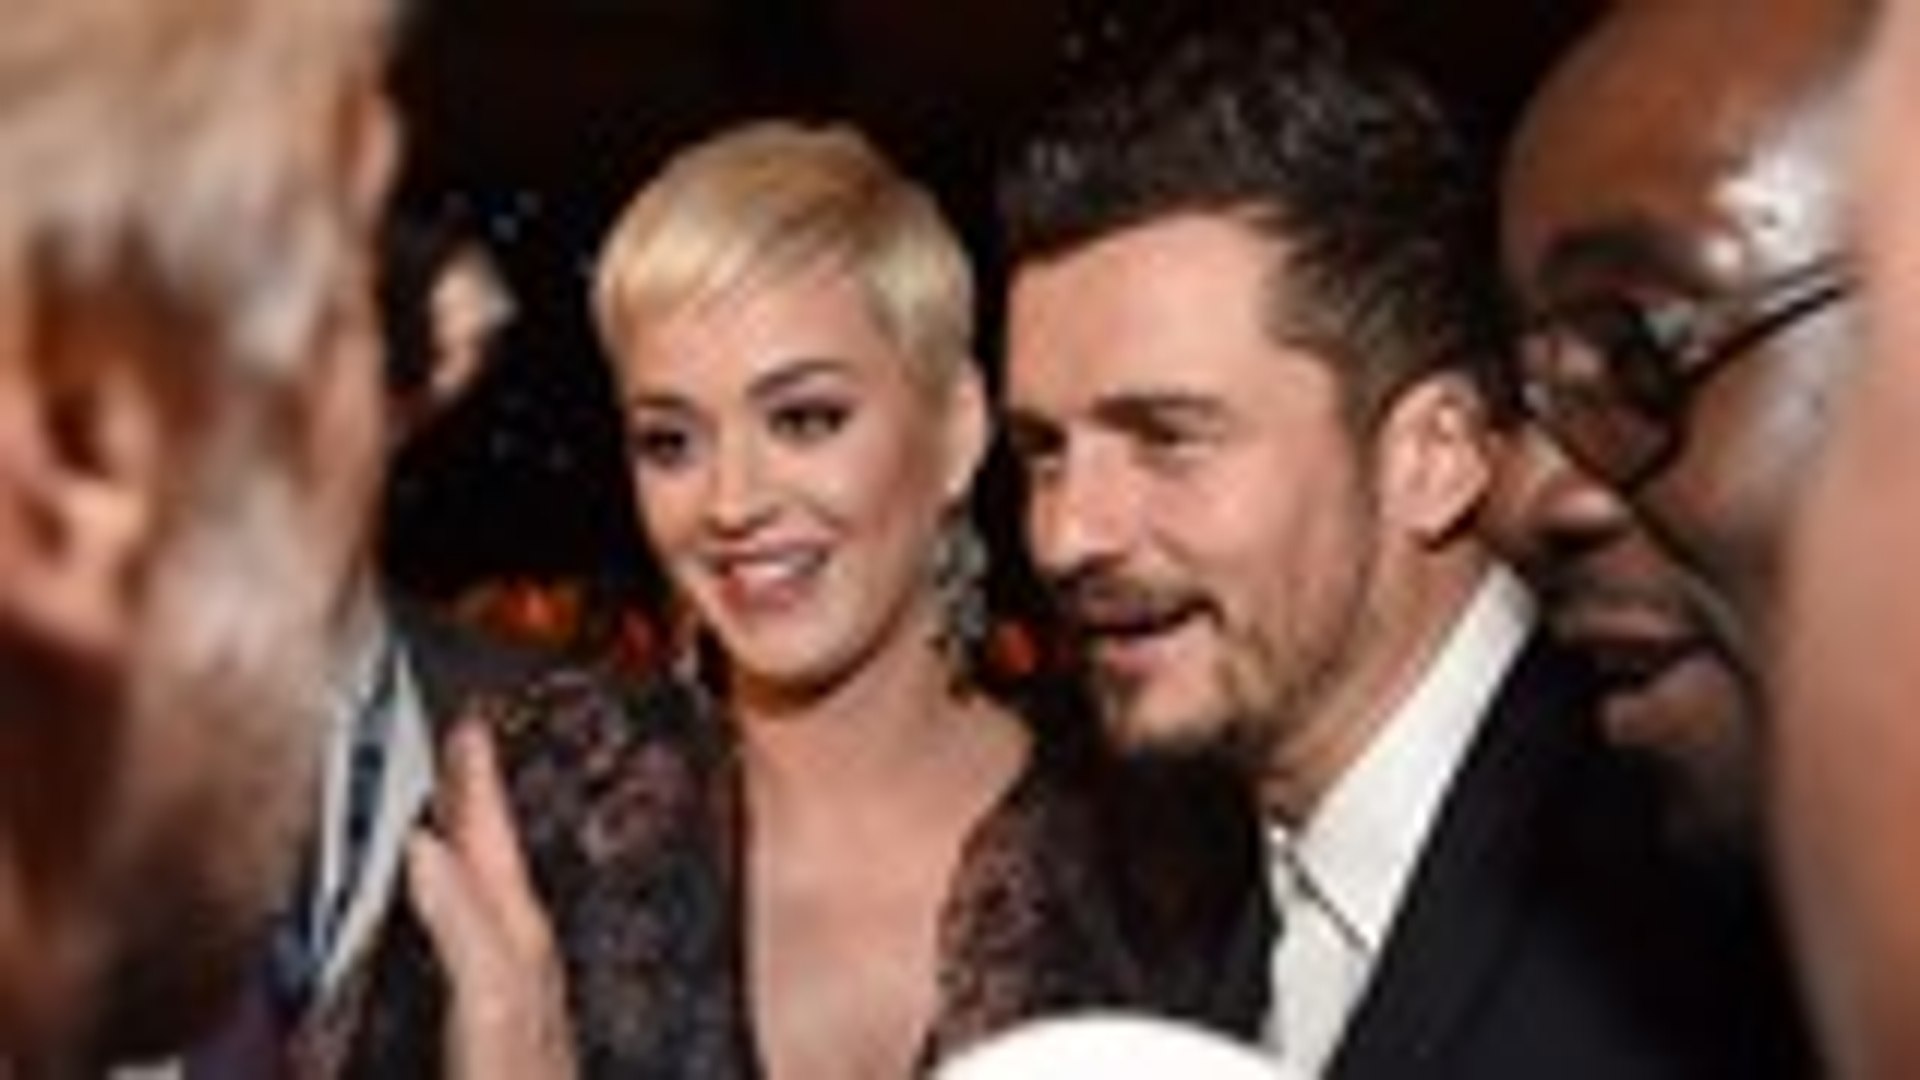 Orlando Bloom is All For Katy Perry and Taylor Swift Moving Past Their Feud | Billboard News